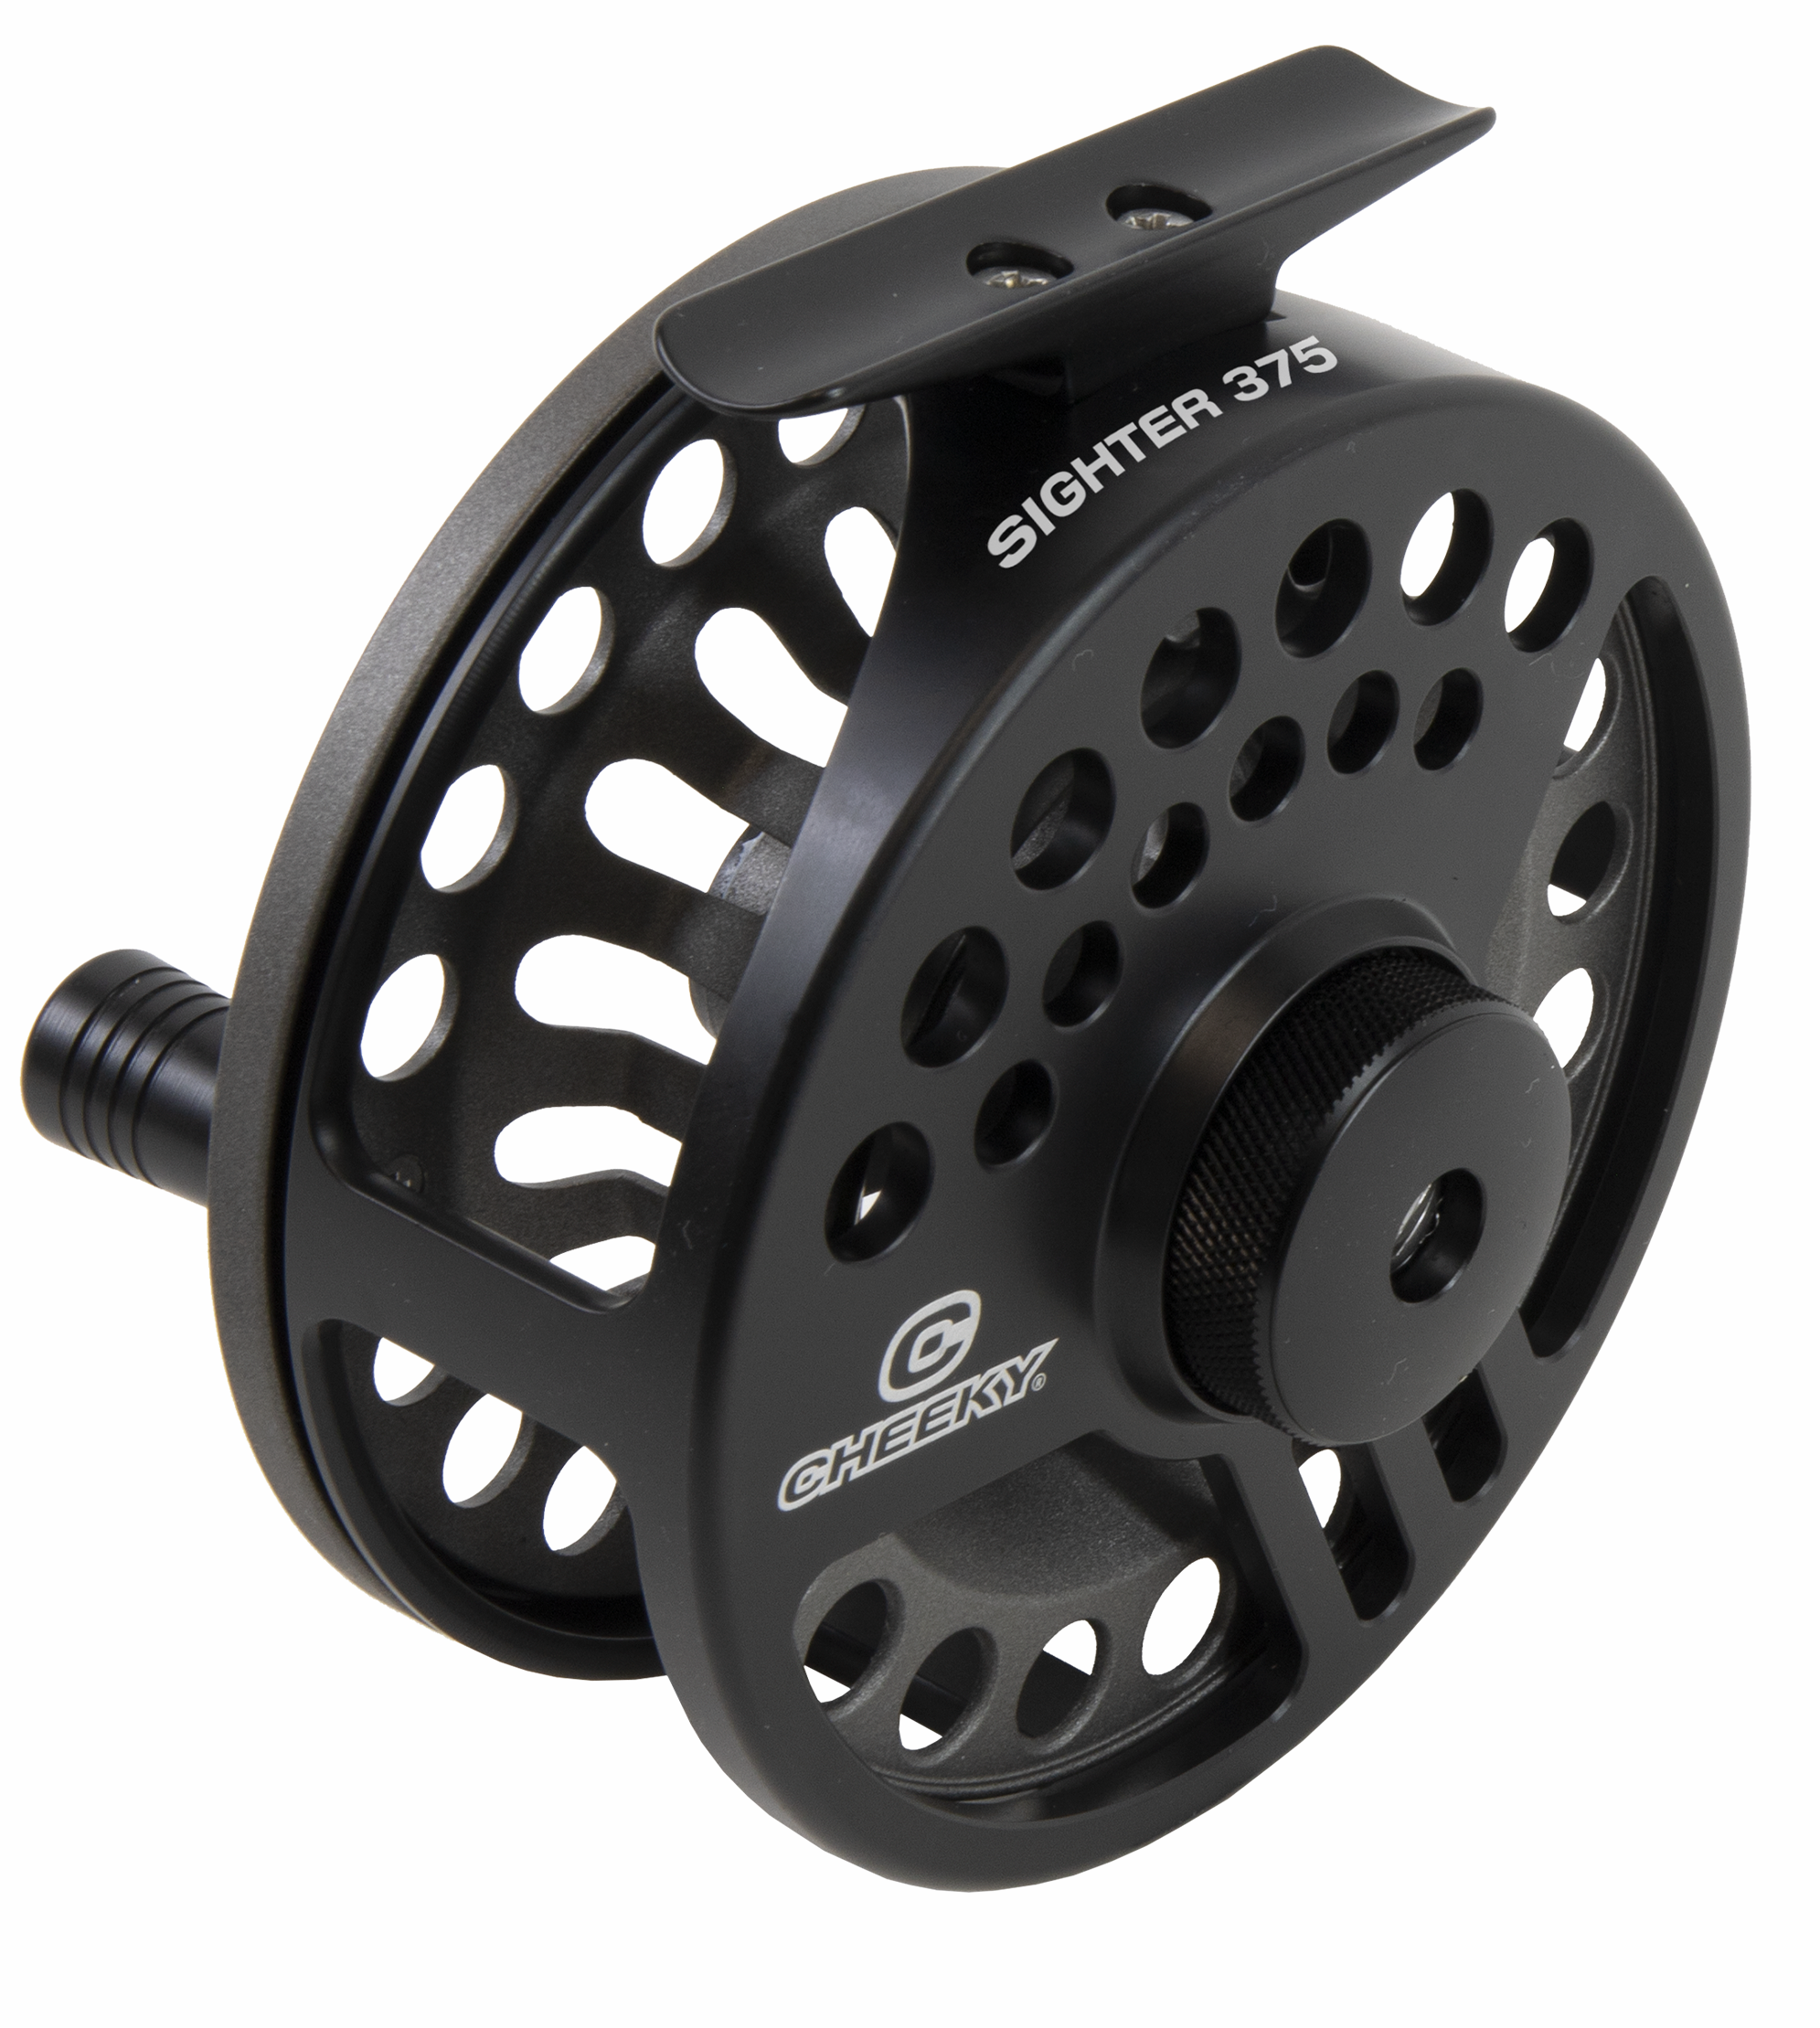 Cheeky Tyro Reel plus Spare Spool Combo - Black/Silver - The Fly